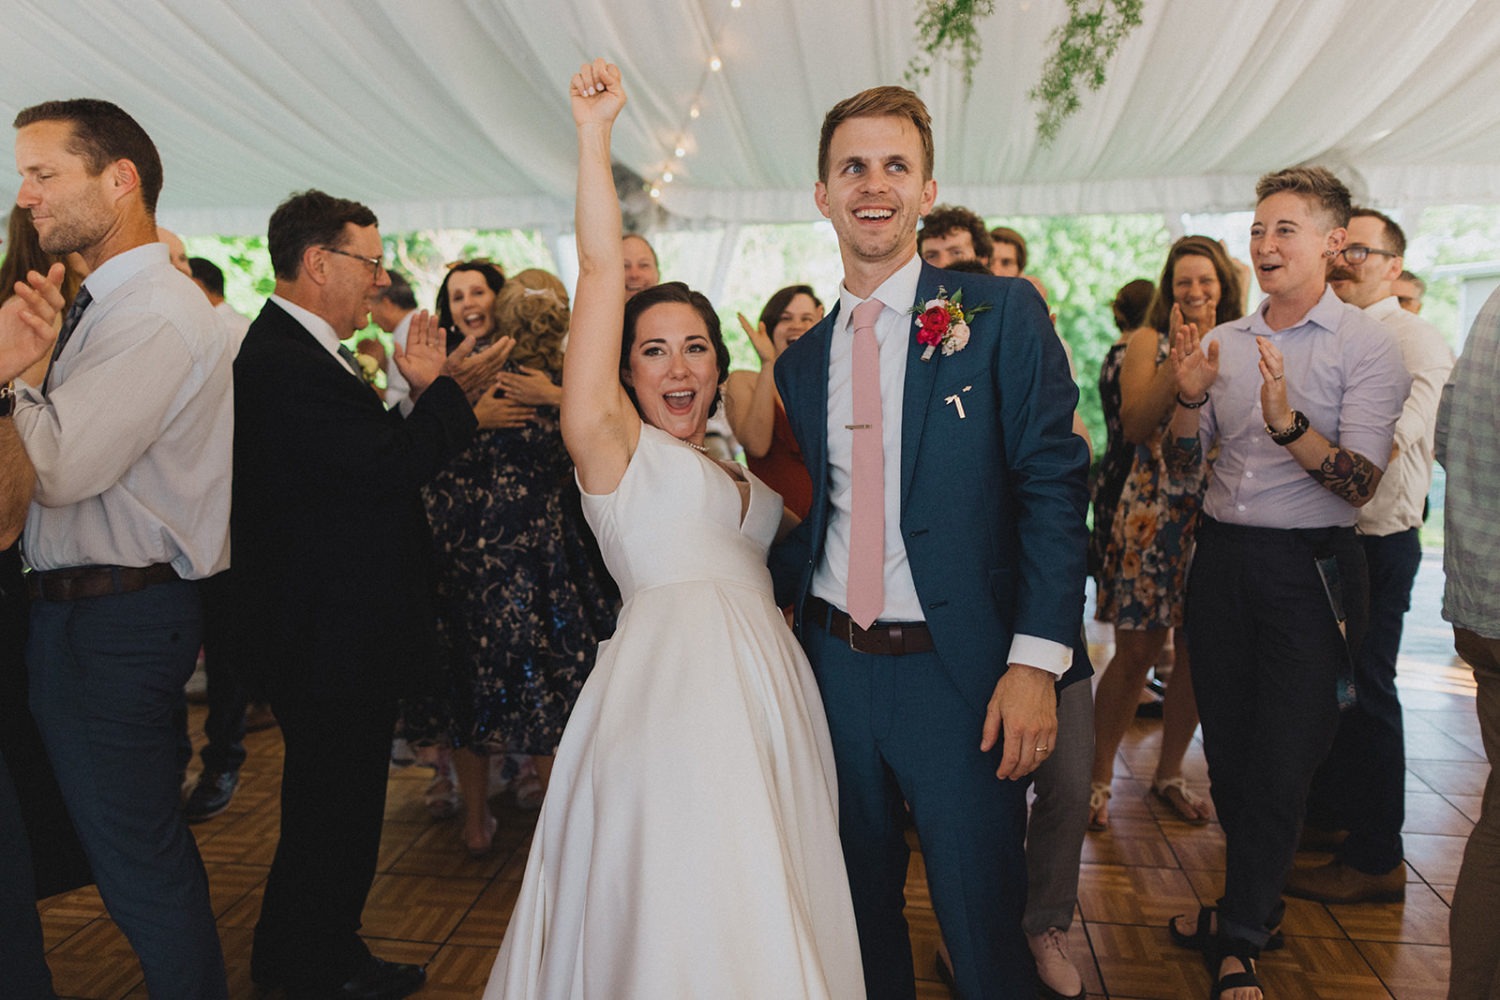 Couple cheers on the dance floor with guests at nature wedding venue